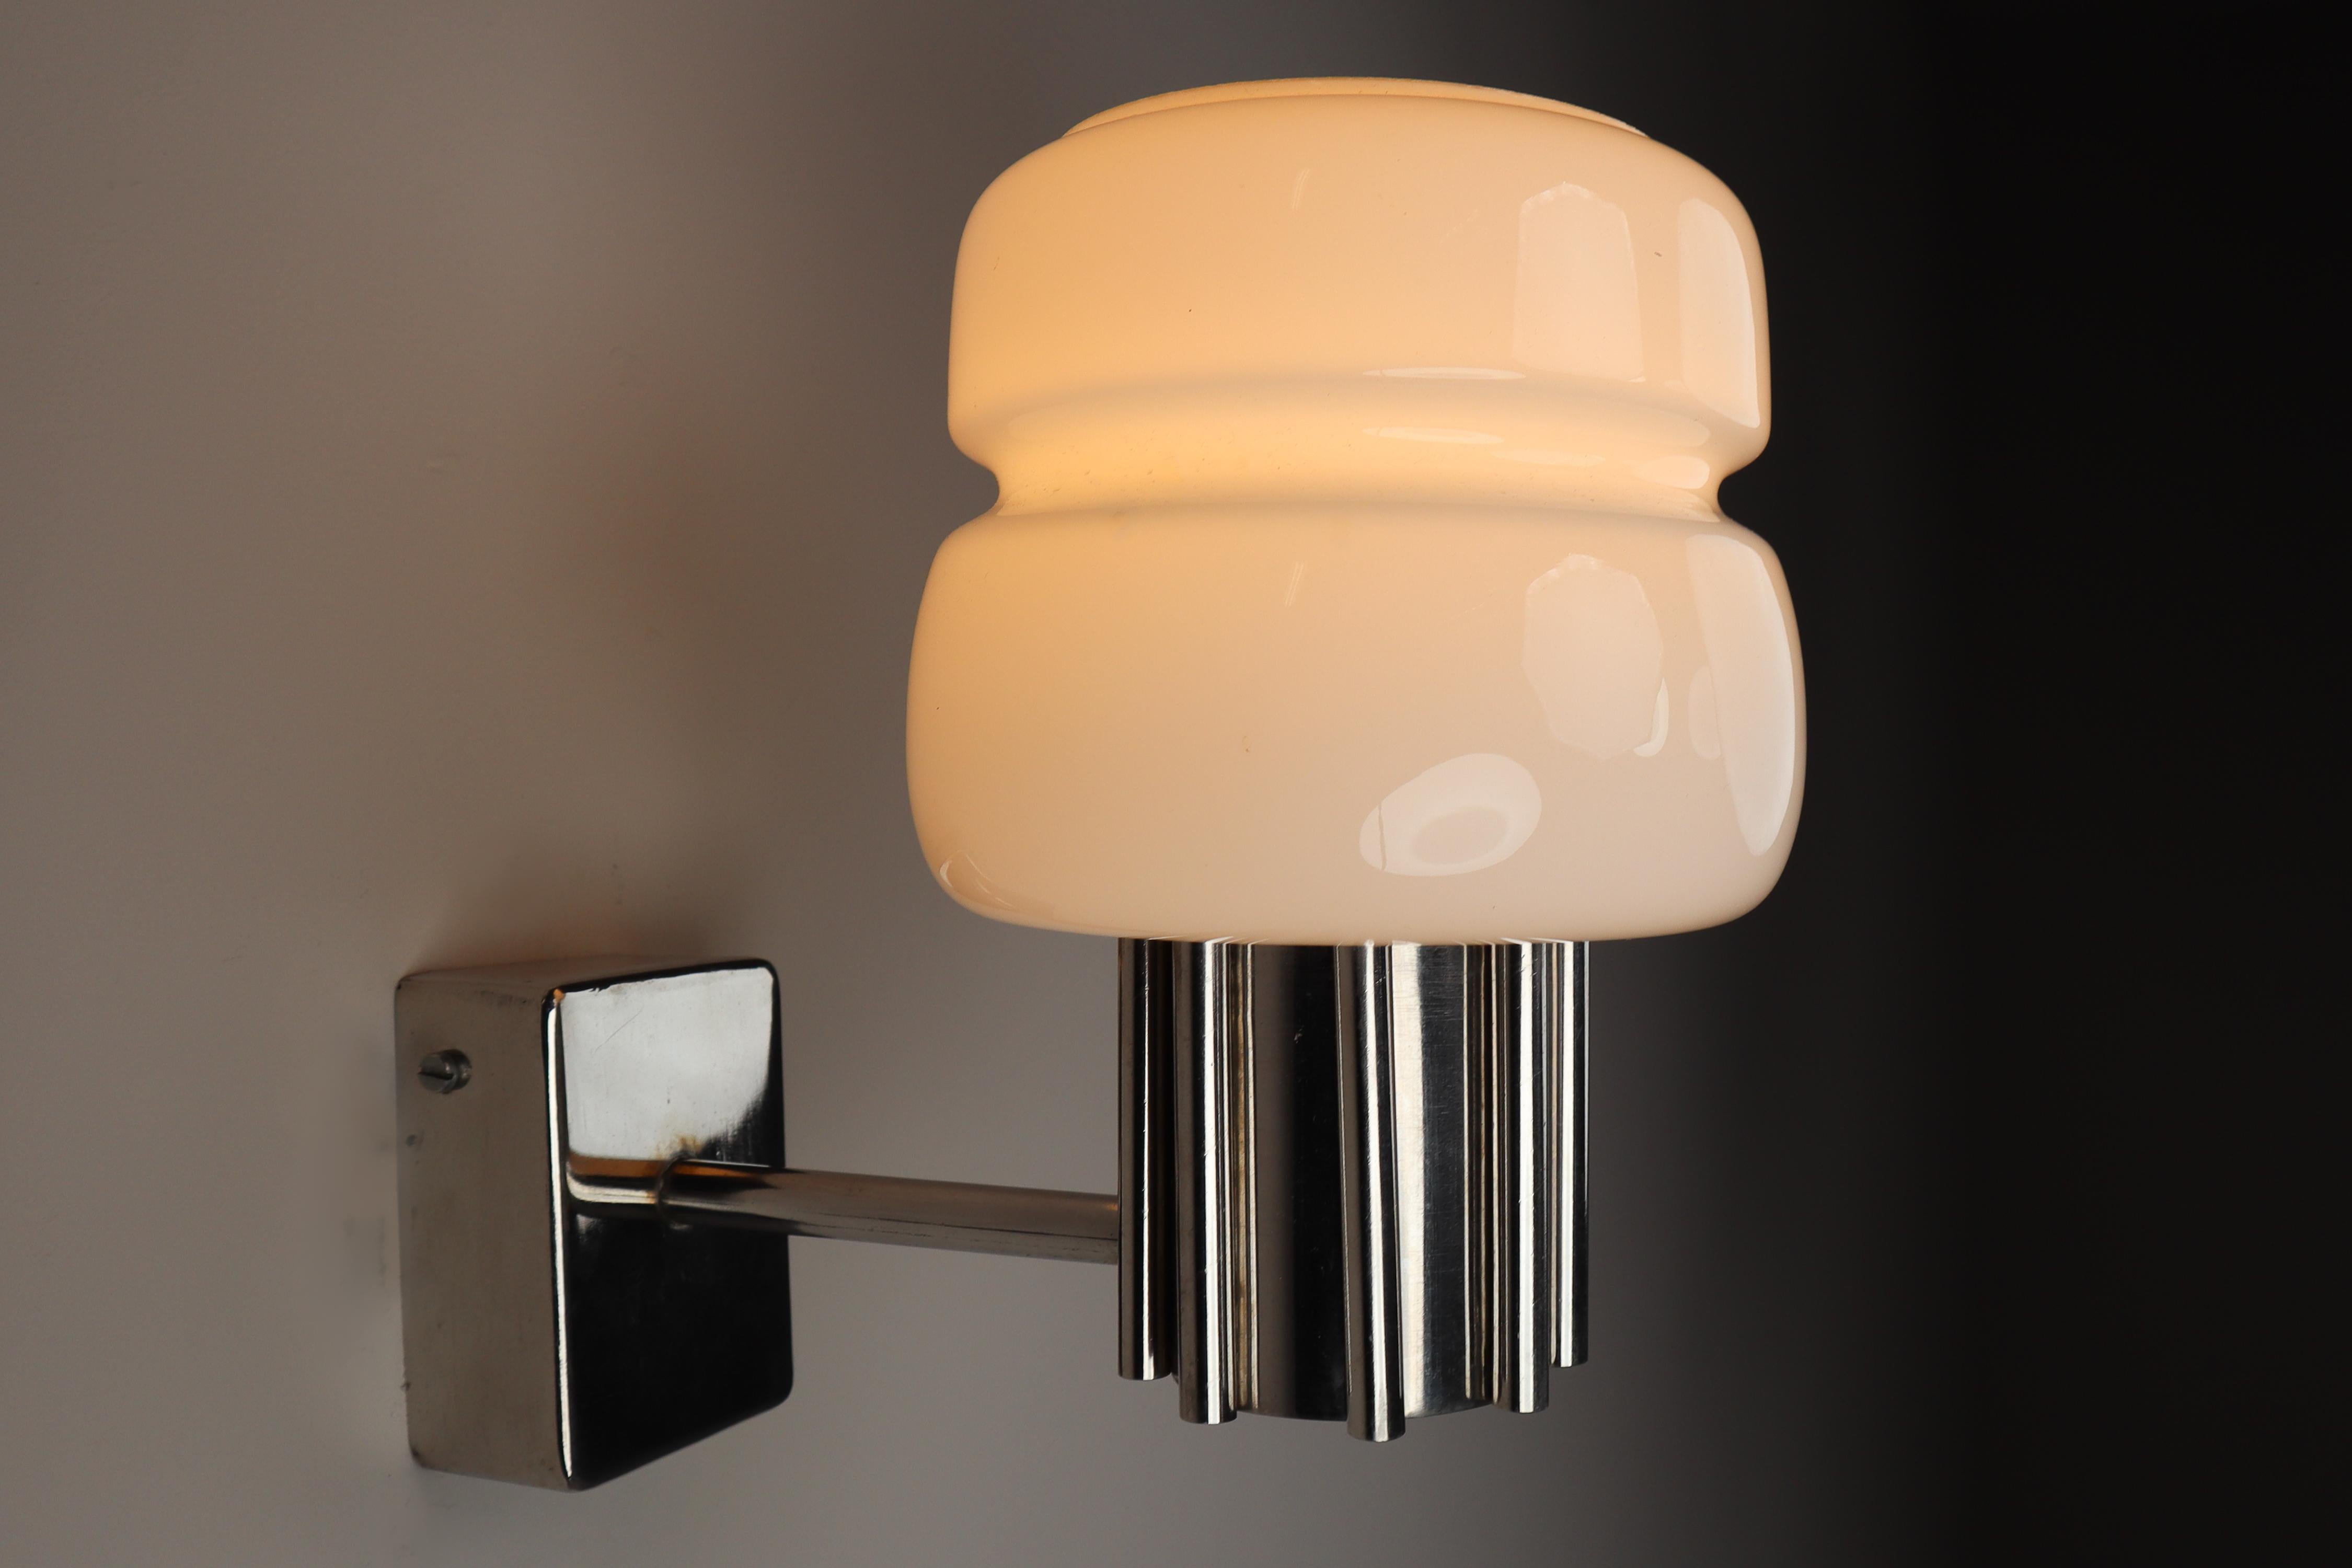 Mid-Century Modern Wall Lights Opaline Glass and Steel, Italy, 1970s

Modern Italian wall lights with steel and opaline glass, Italy, the 1970s. The pleasant light it spreads is very atmospheric; The stylish elegance of this lamp suits many